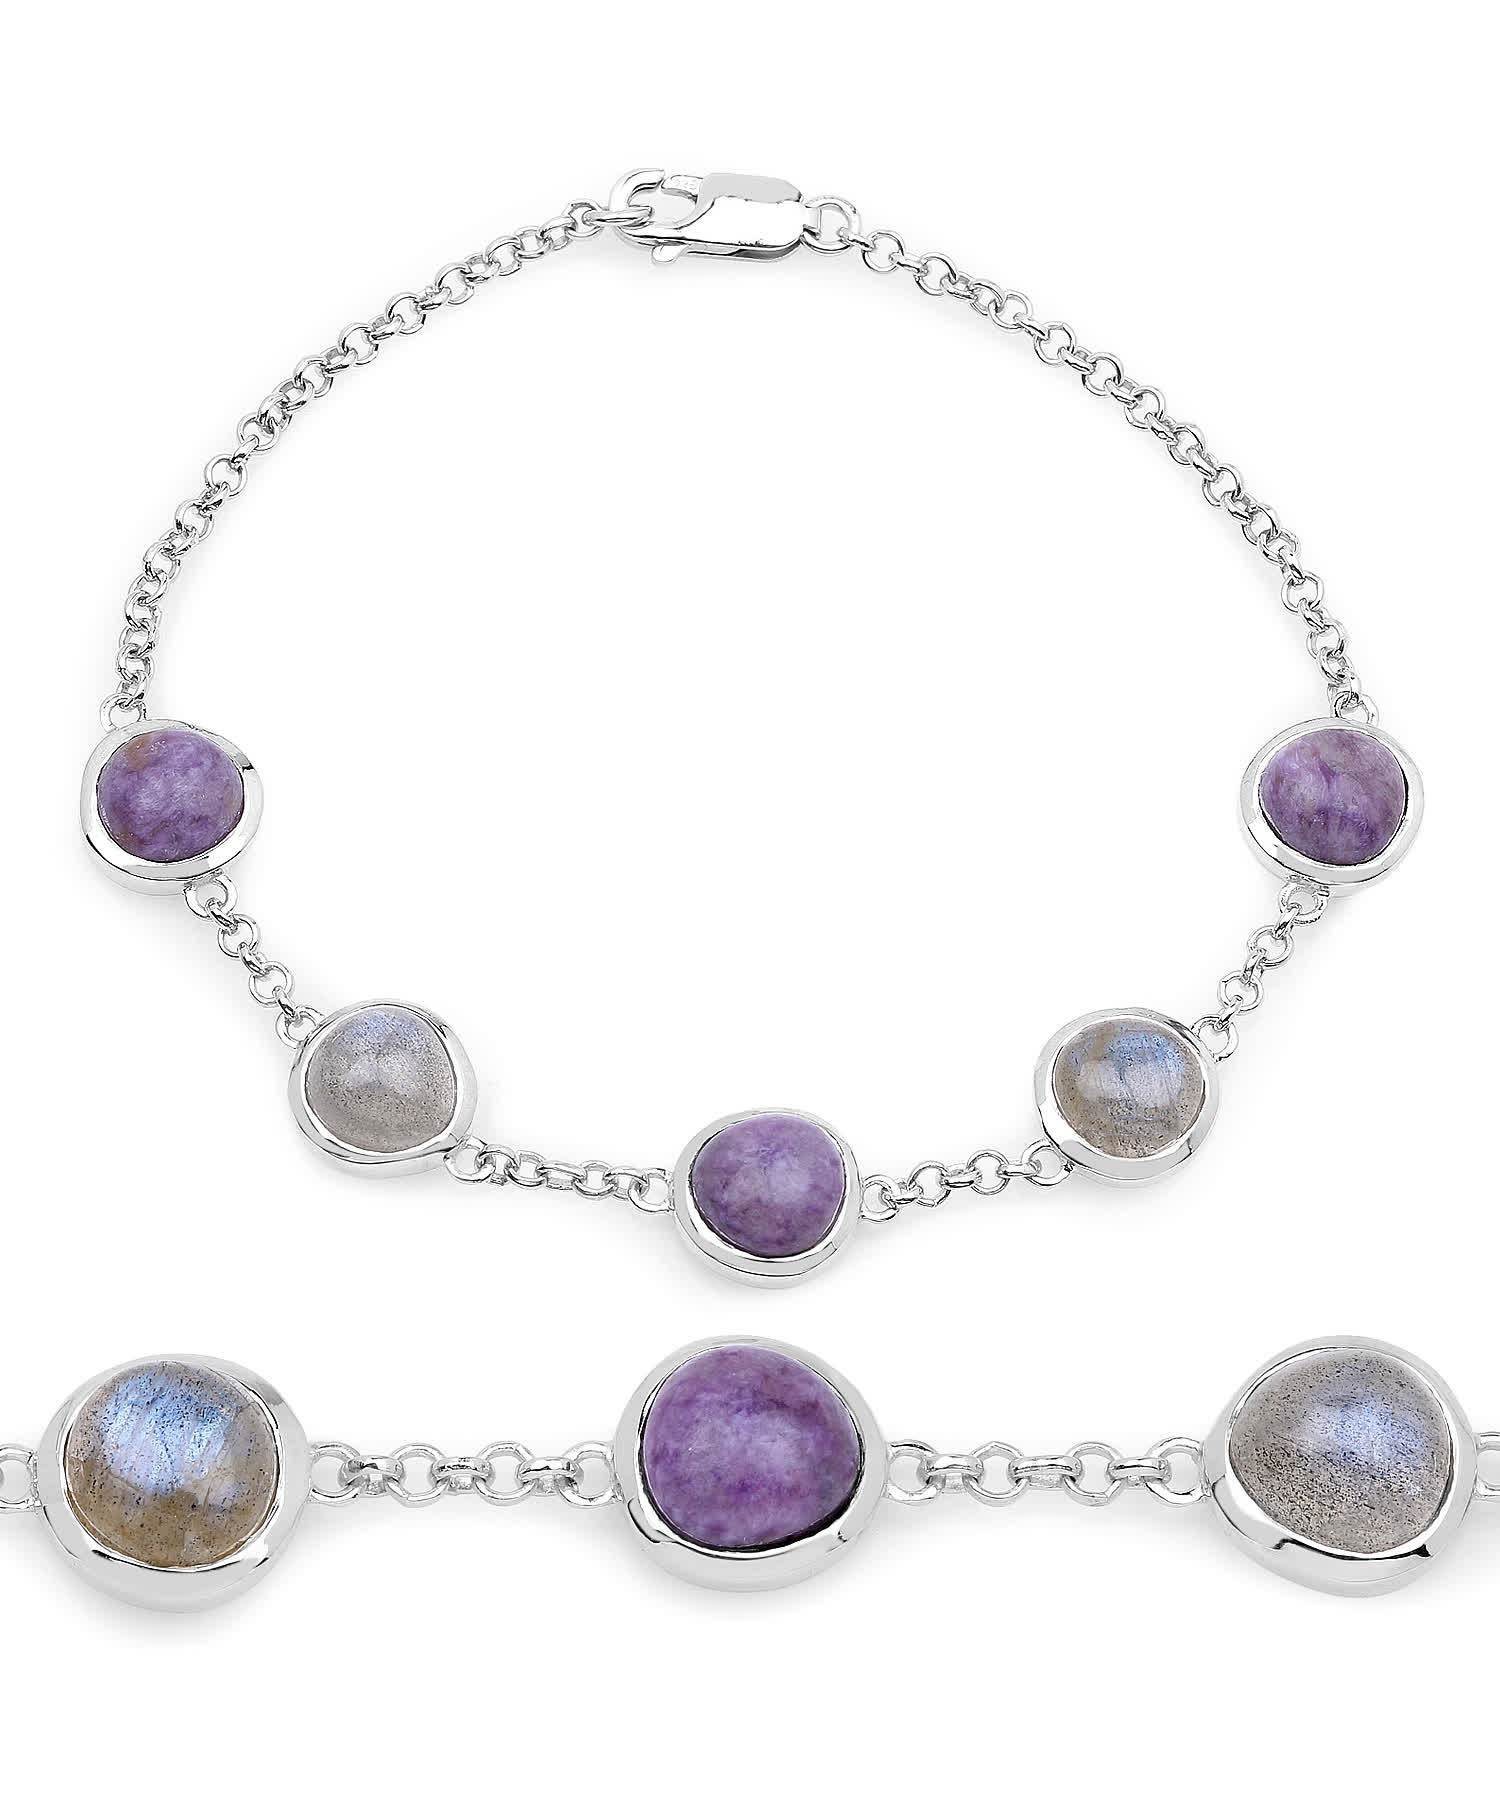 11.00ctw Natural Charolite and Labradorite Rhodium Plated 925 Sterling Silver Link Bracelet View 2